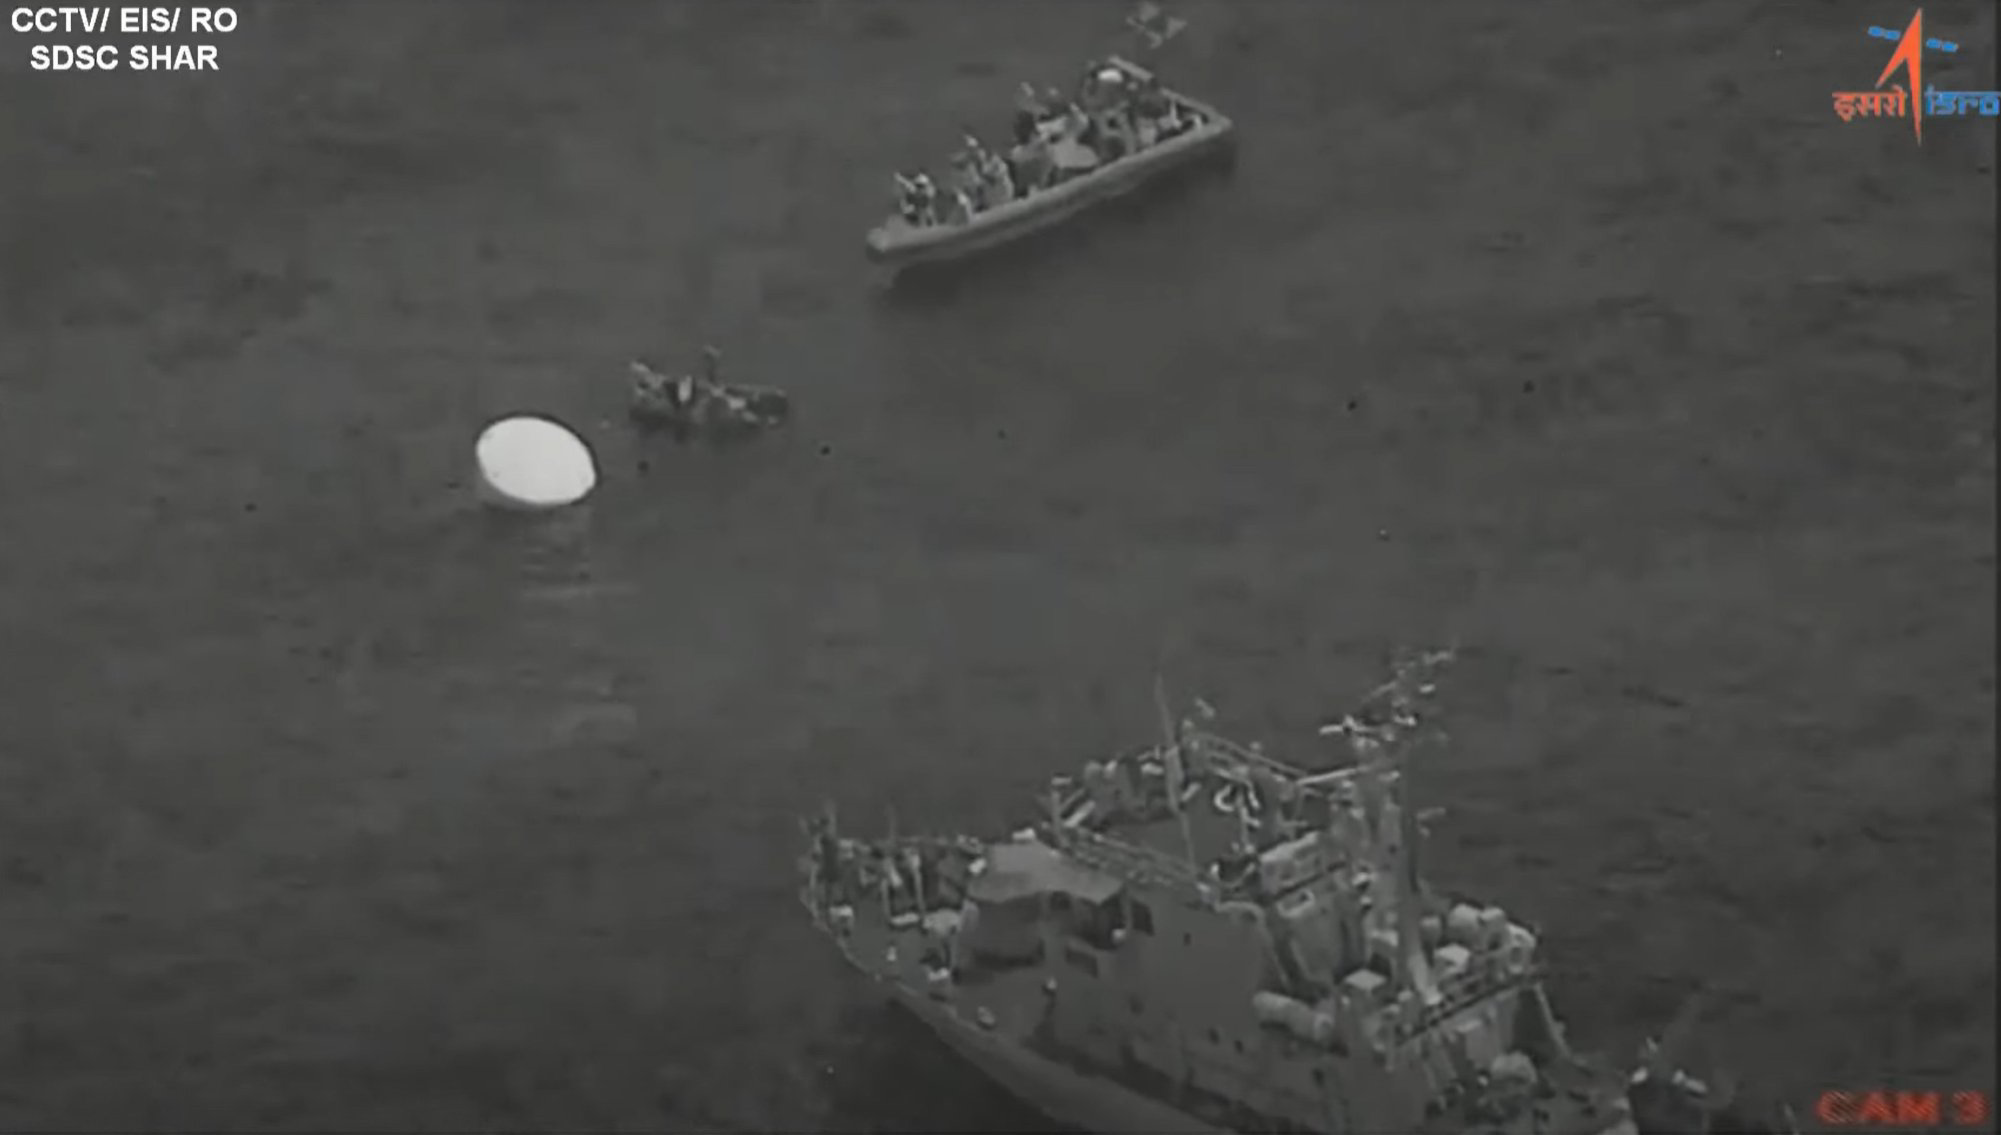 Gaganyaan splashed down with recovery ships securing the capsule.